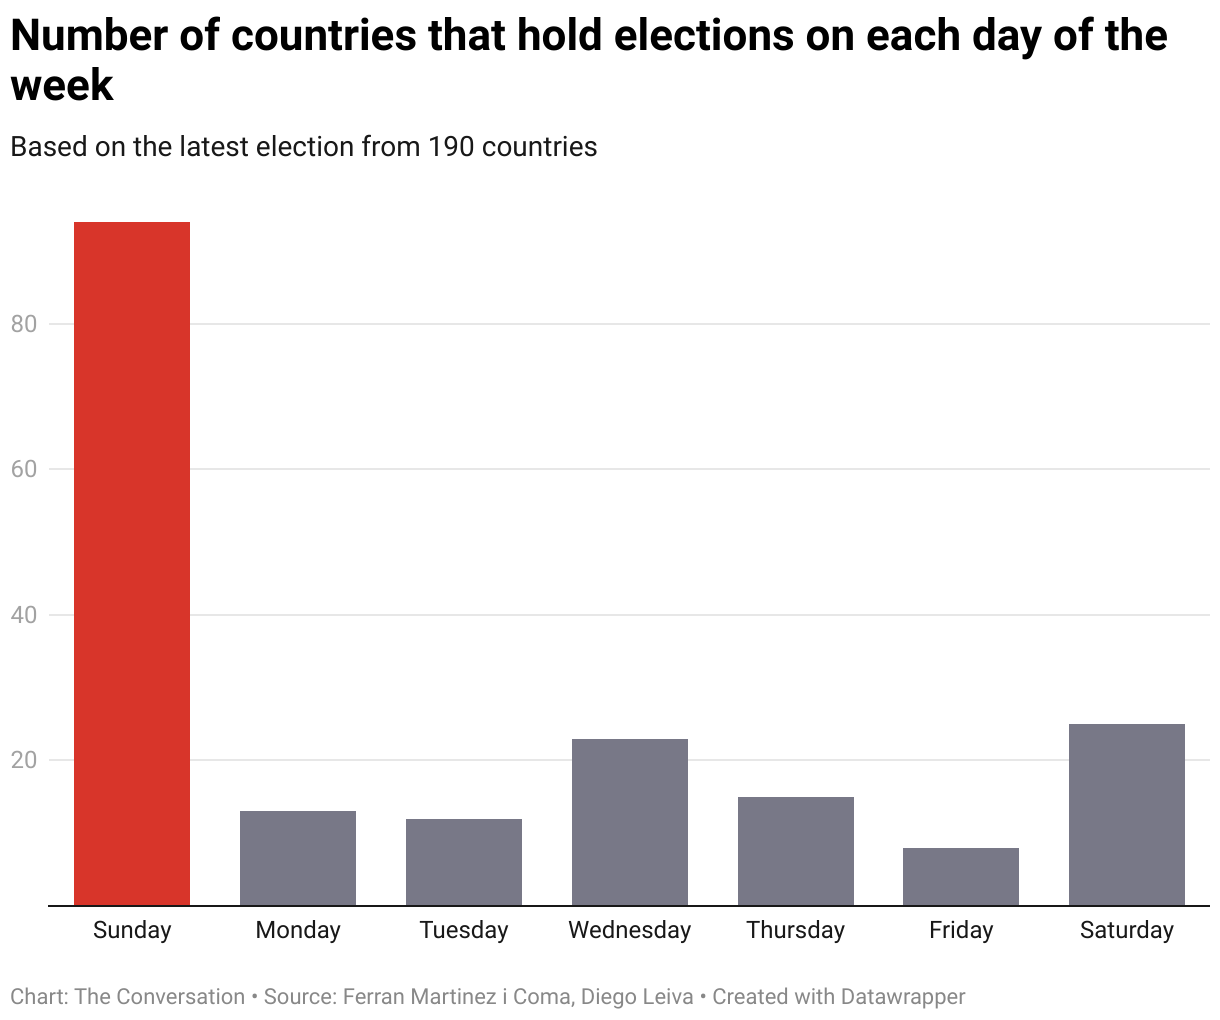 number-of-countries-that-hold-elections-on-each-day-of-the-week.png